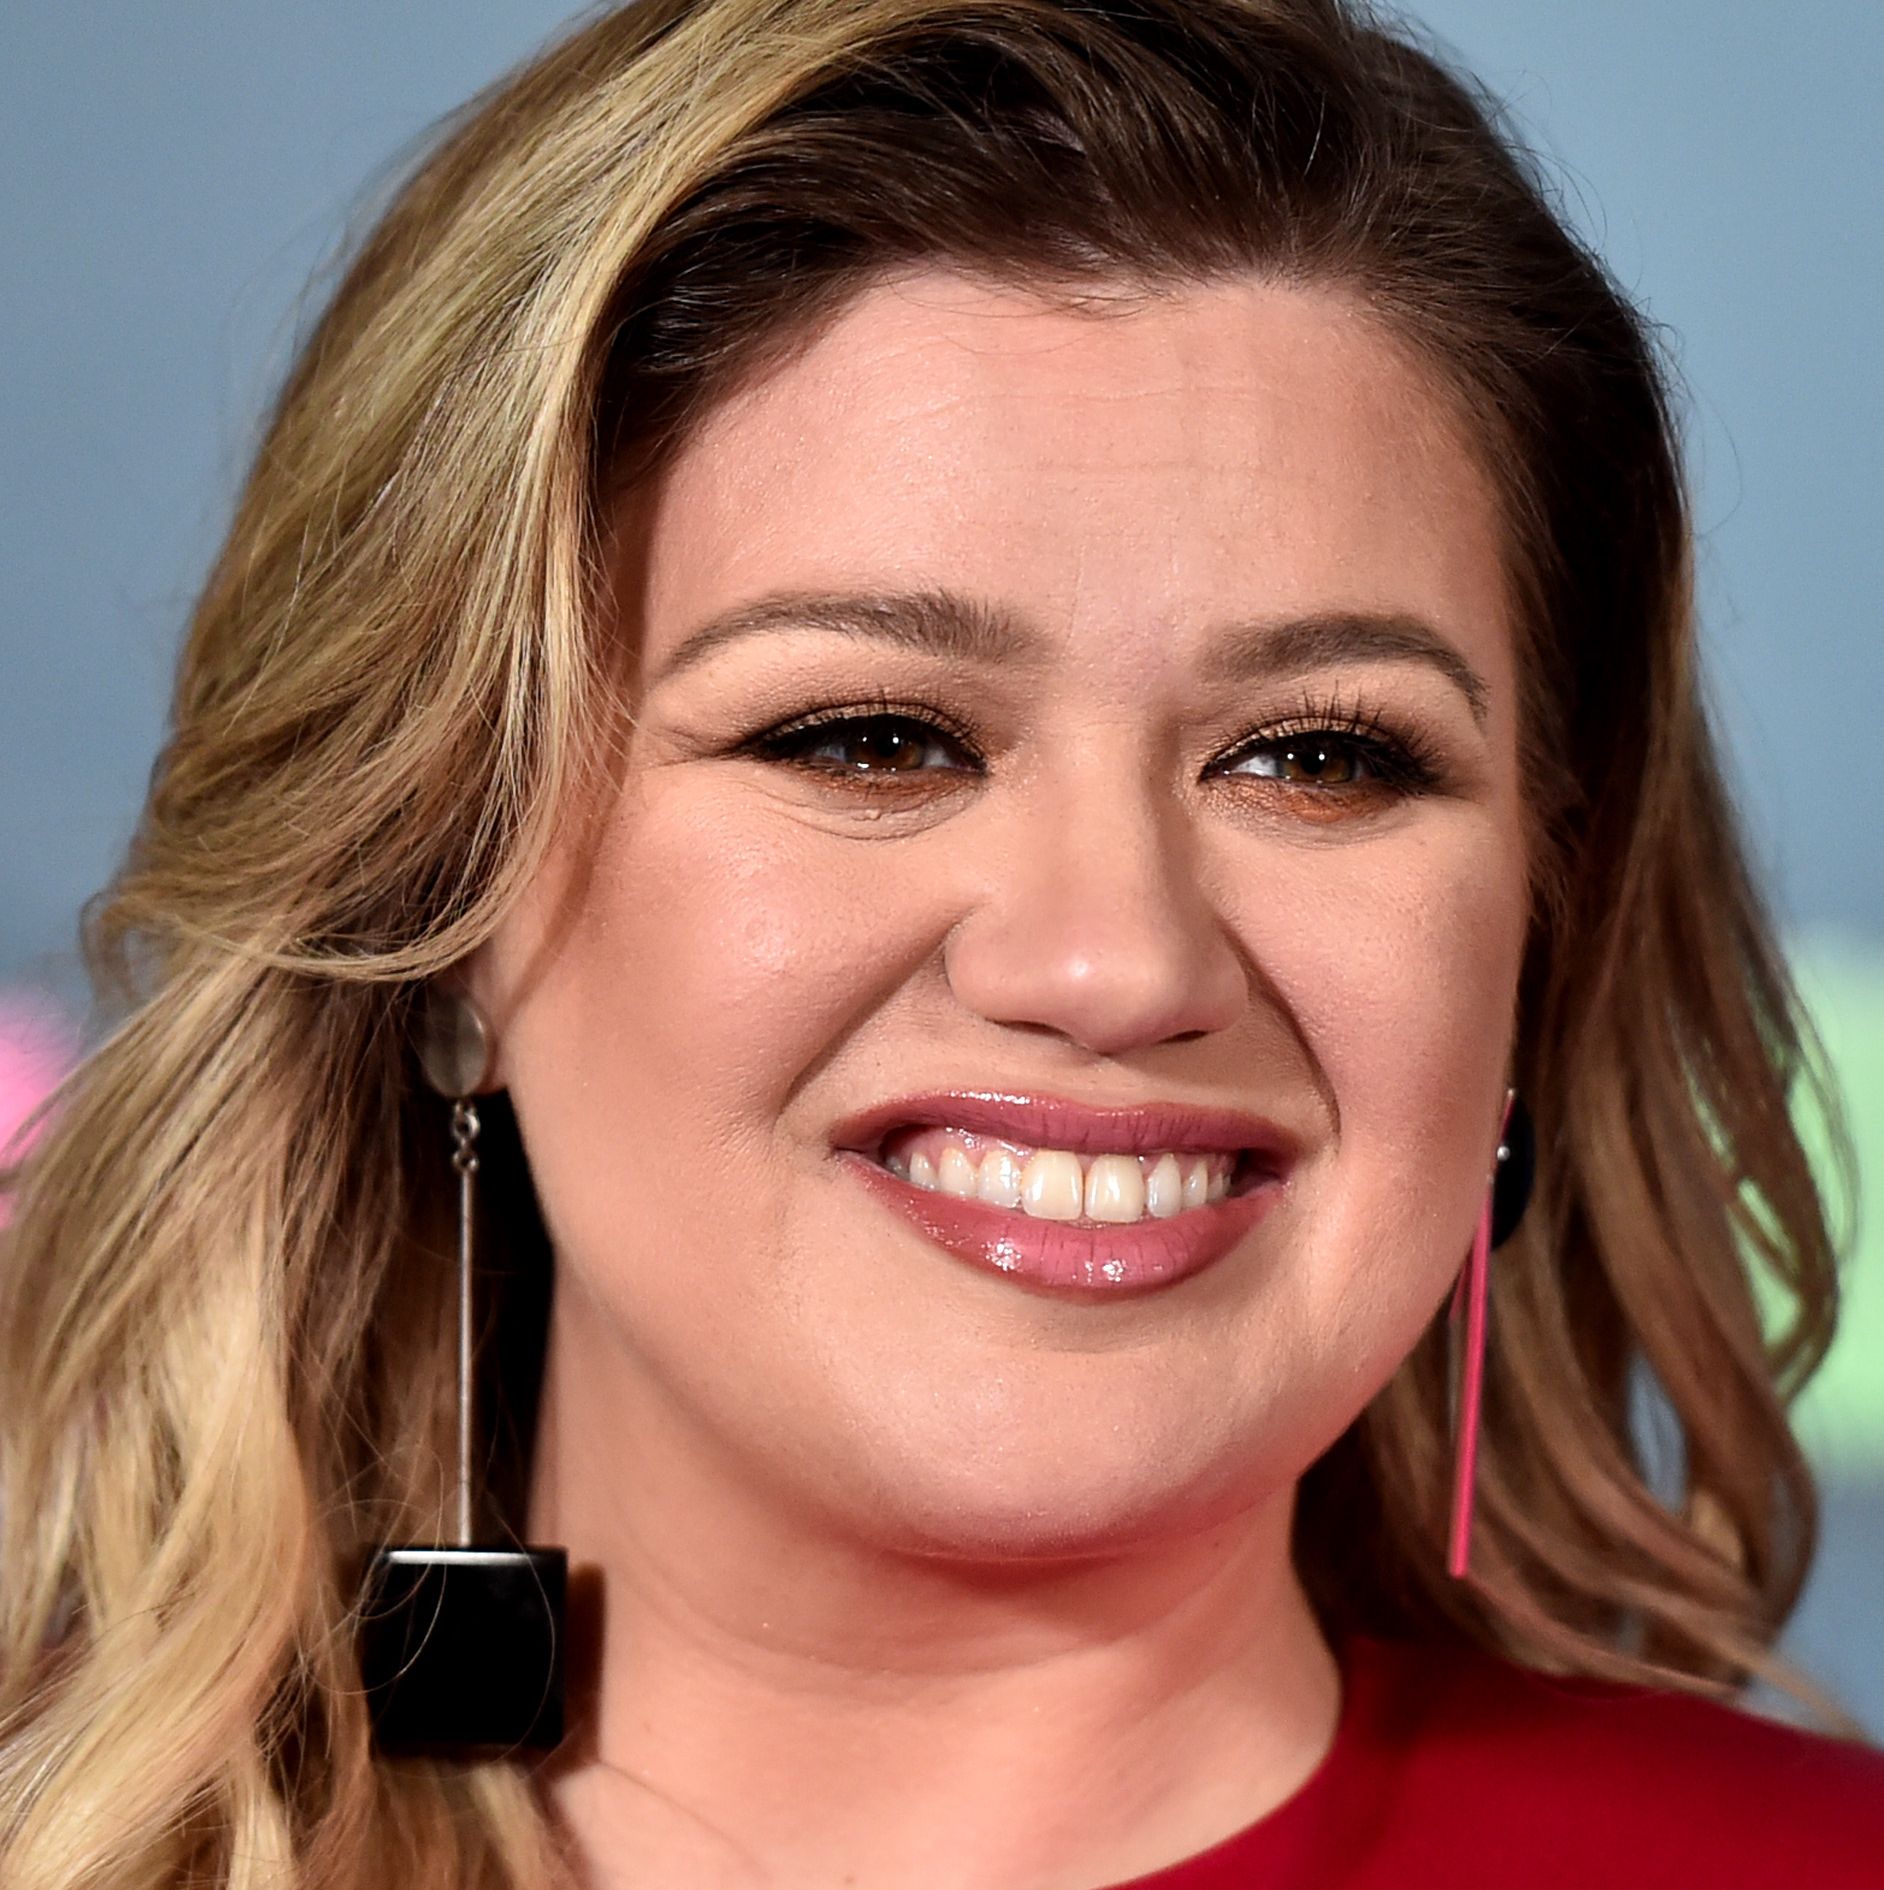 'The Voice' Fans Beg Kelly Clarkson to Be Careful After Seeing Her 